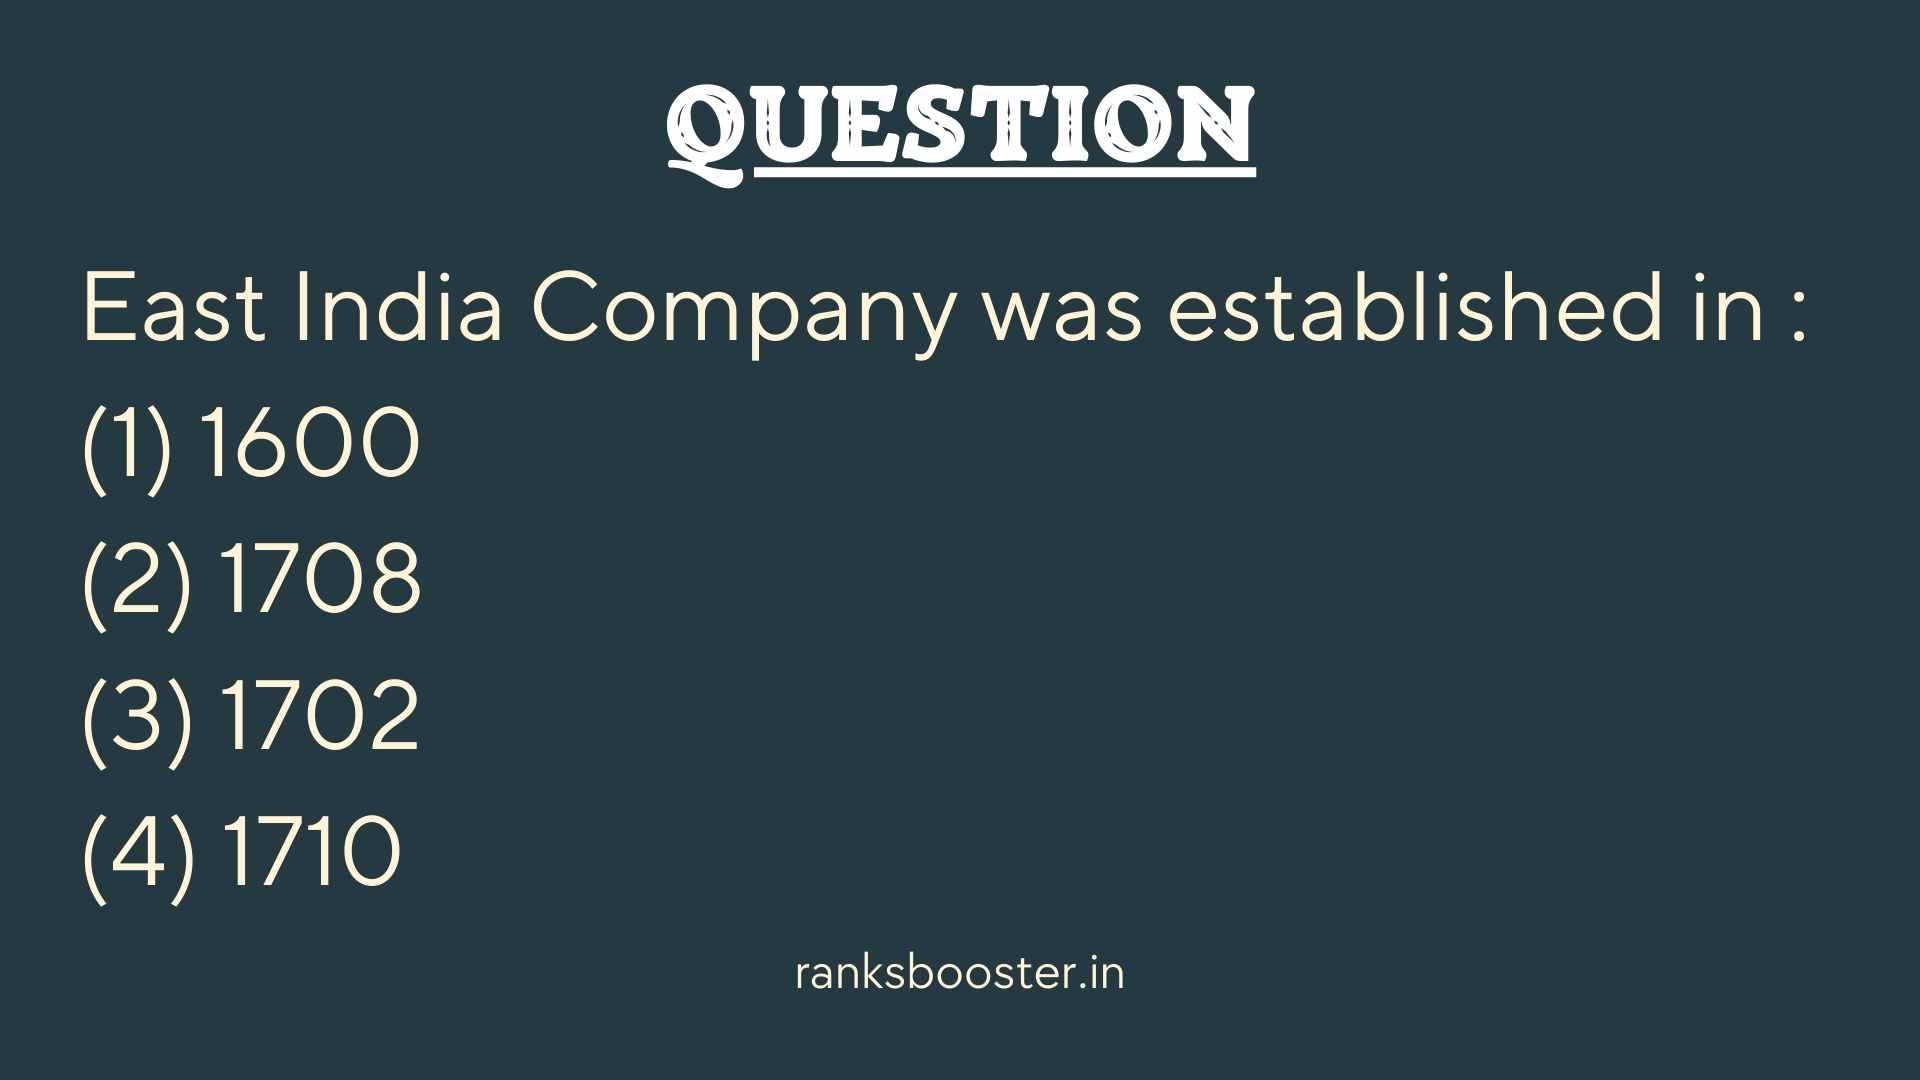 East India Company was established in